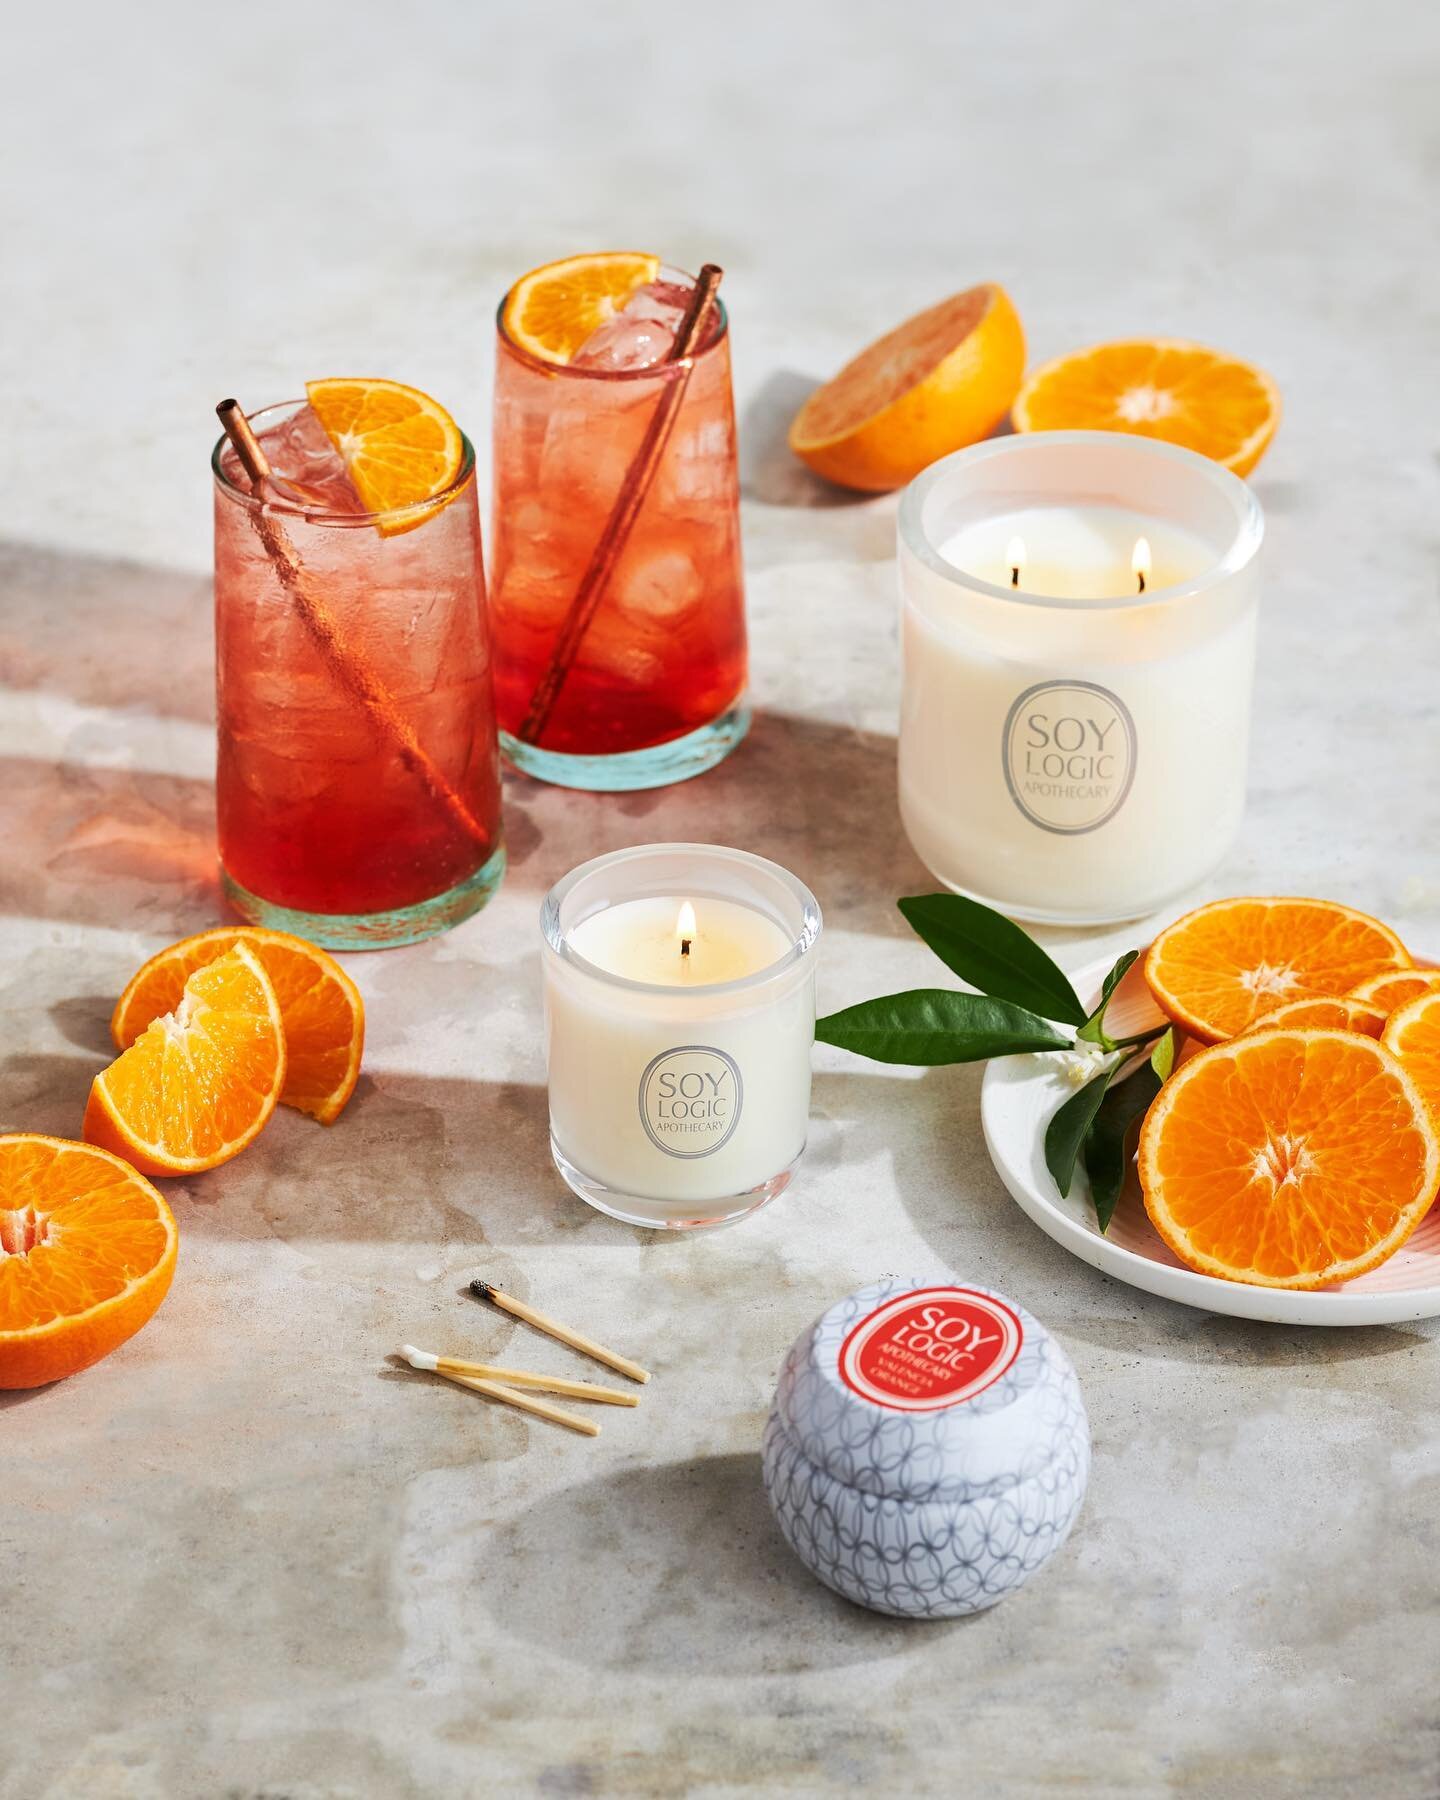 Let&rsquo;s hold on to these last days of summer and have a spritz! Then when the cold weather arrives, light up the Valencia Orange candle from @shopcouturebrands and revisit the warmer times 🍊